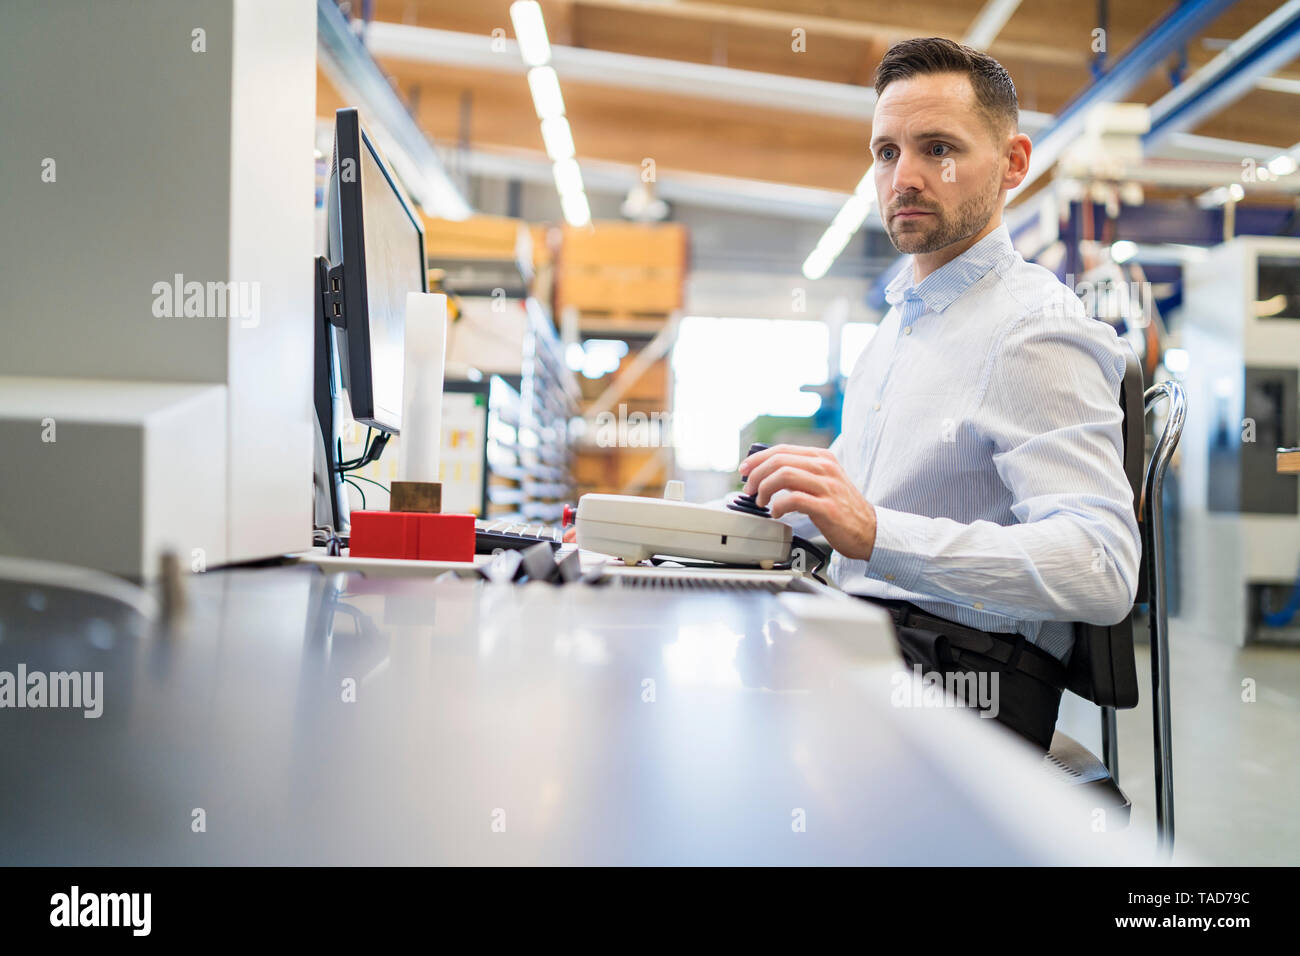 Man operating machine at desk in a factory Stock Photo